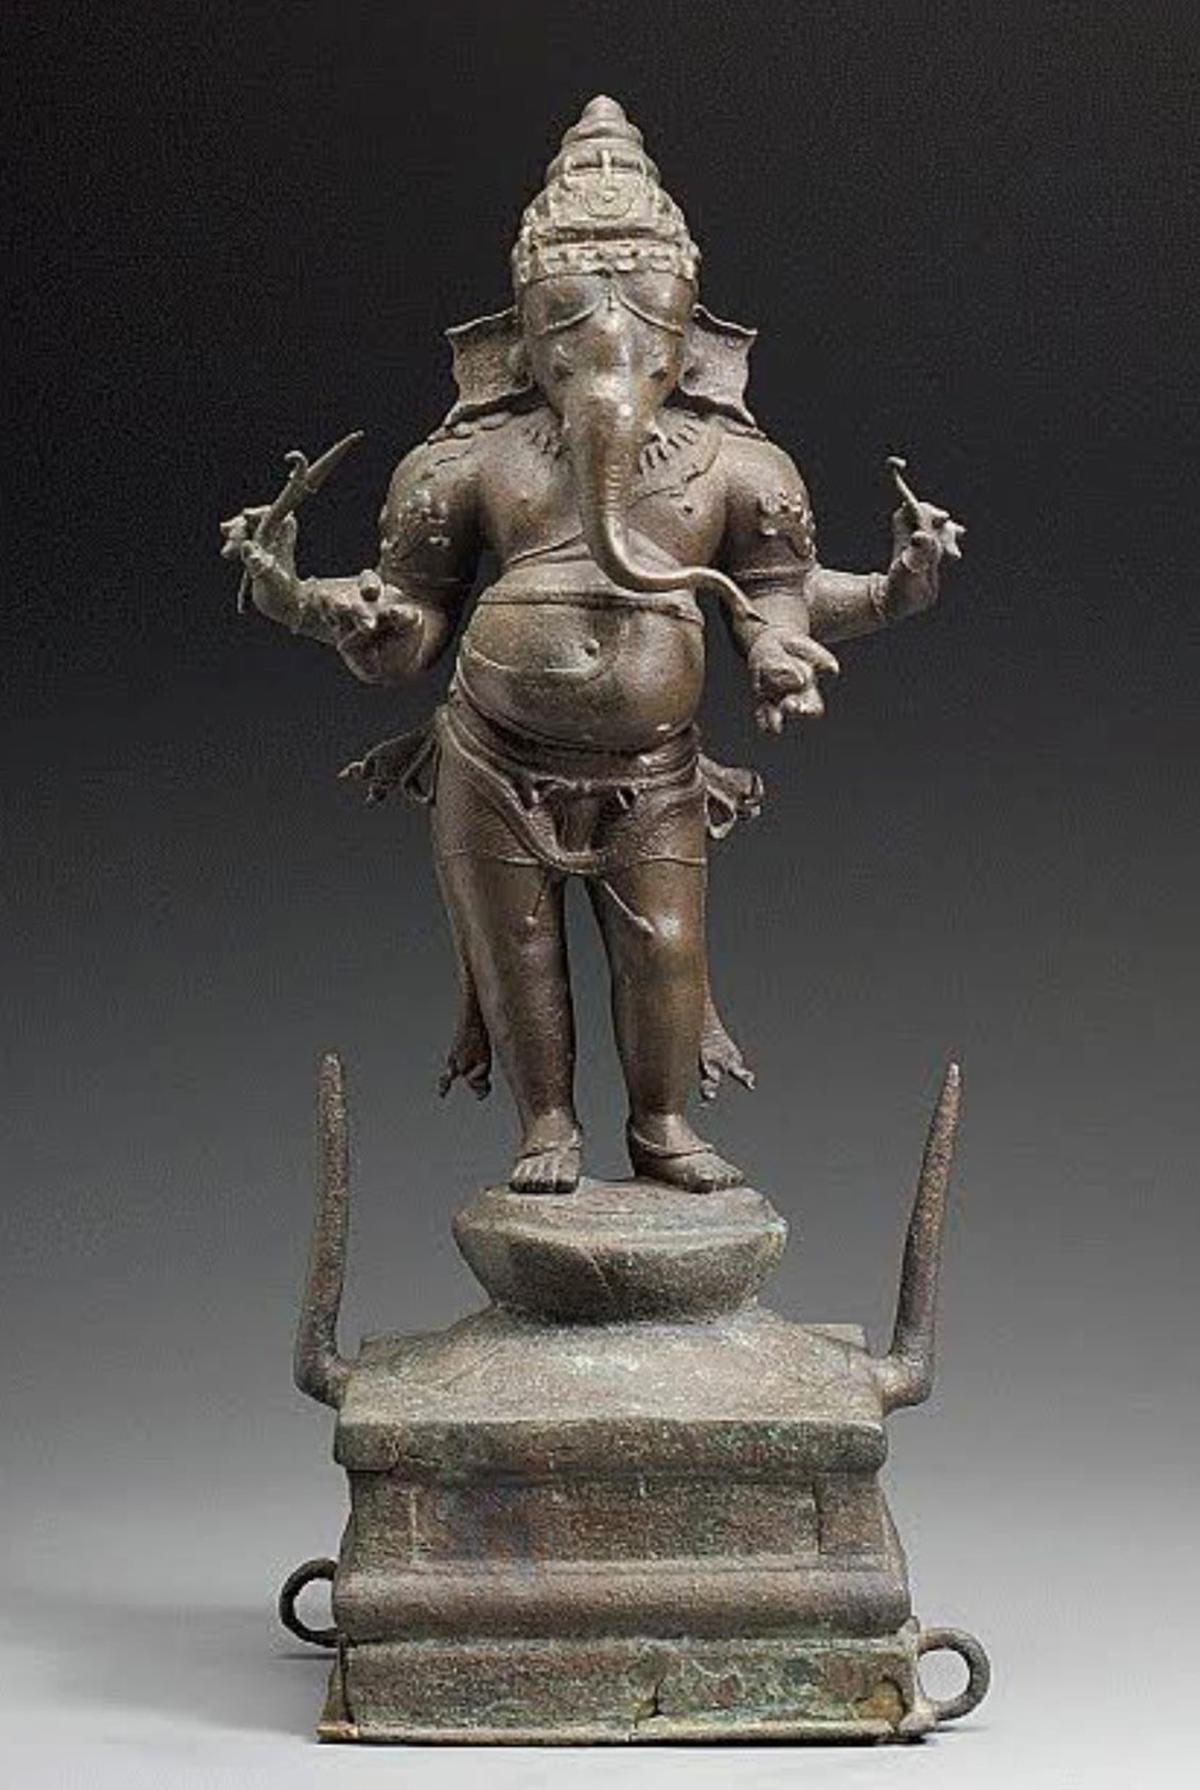 The Idol Wing CID of the Tamil Nadu Police has recovered two stolen antique idols of Yoganarasimha and Ganesha from the Alathur Venugopala Swamy Temple in Tiruvarur district and the Nelson-Atkins Museum in Missouri, Kansas City, USA.